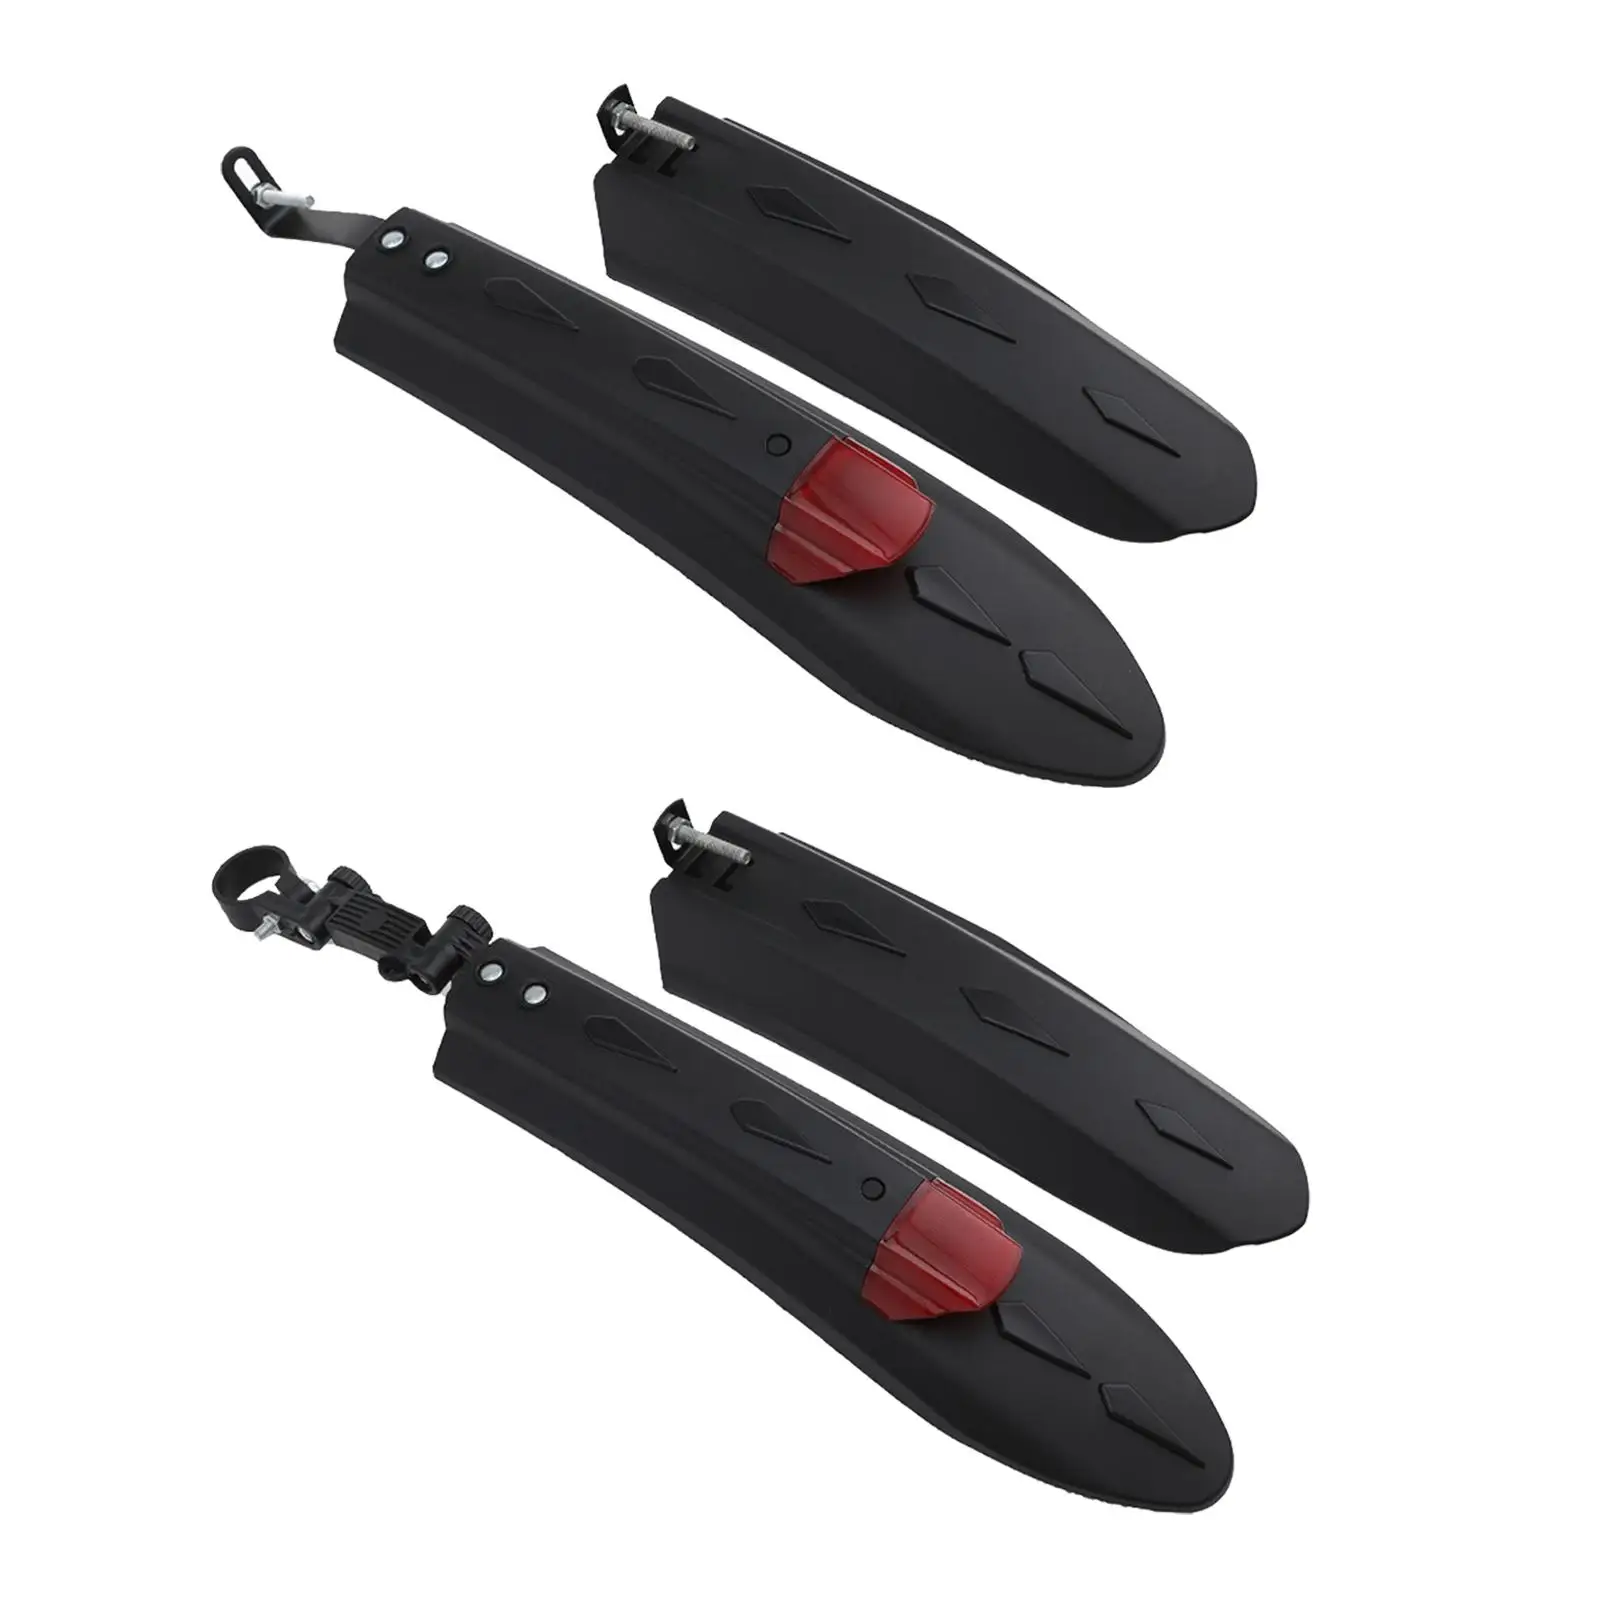 Bike Mudguard Set Wheel Protection Portable Easy Installation Supplies Mudflap for Sports Travel Outdoor Road Bike Accessories